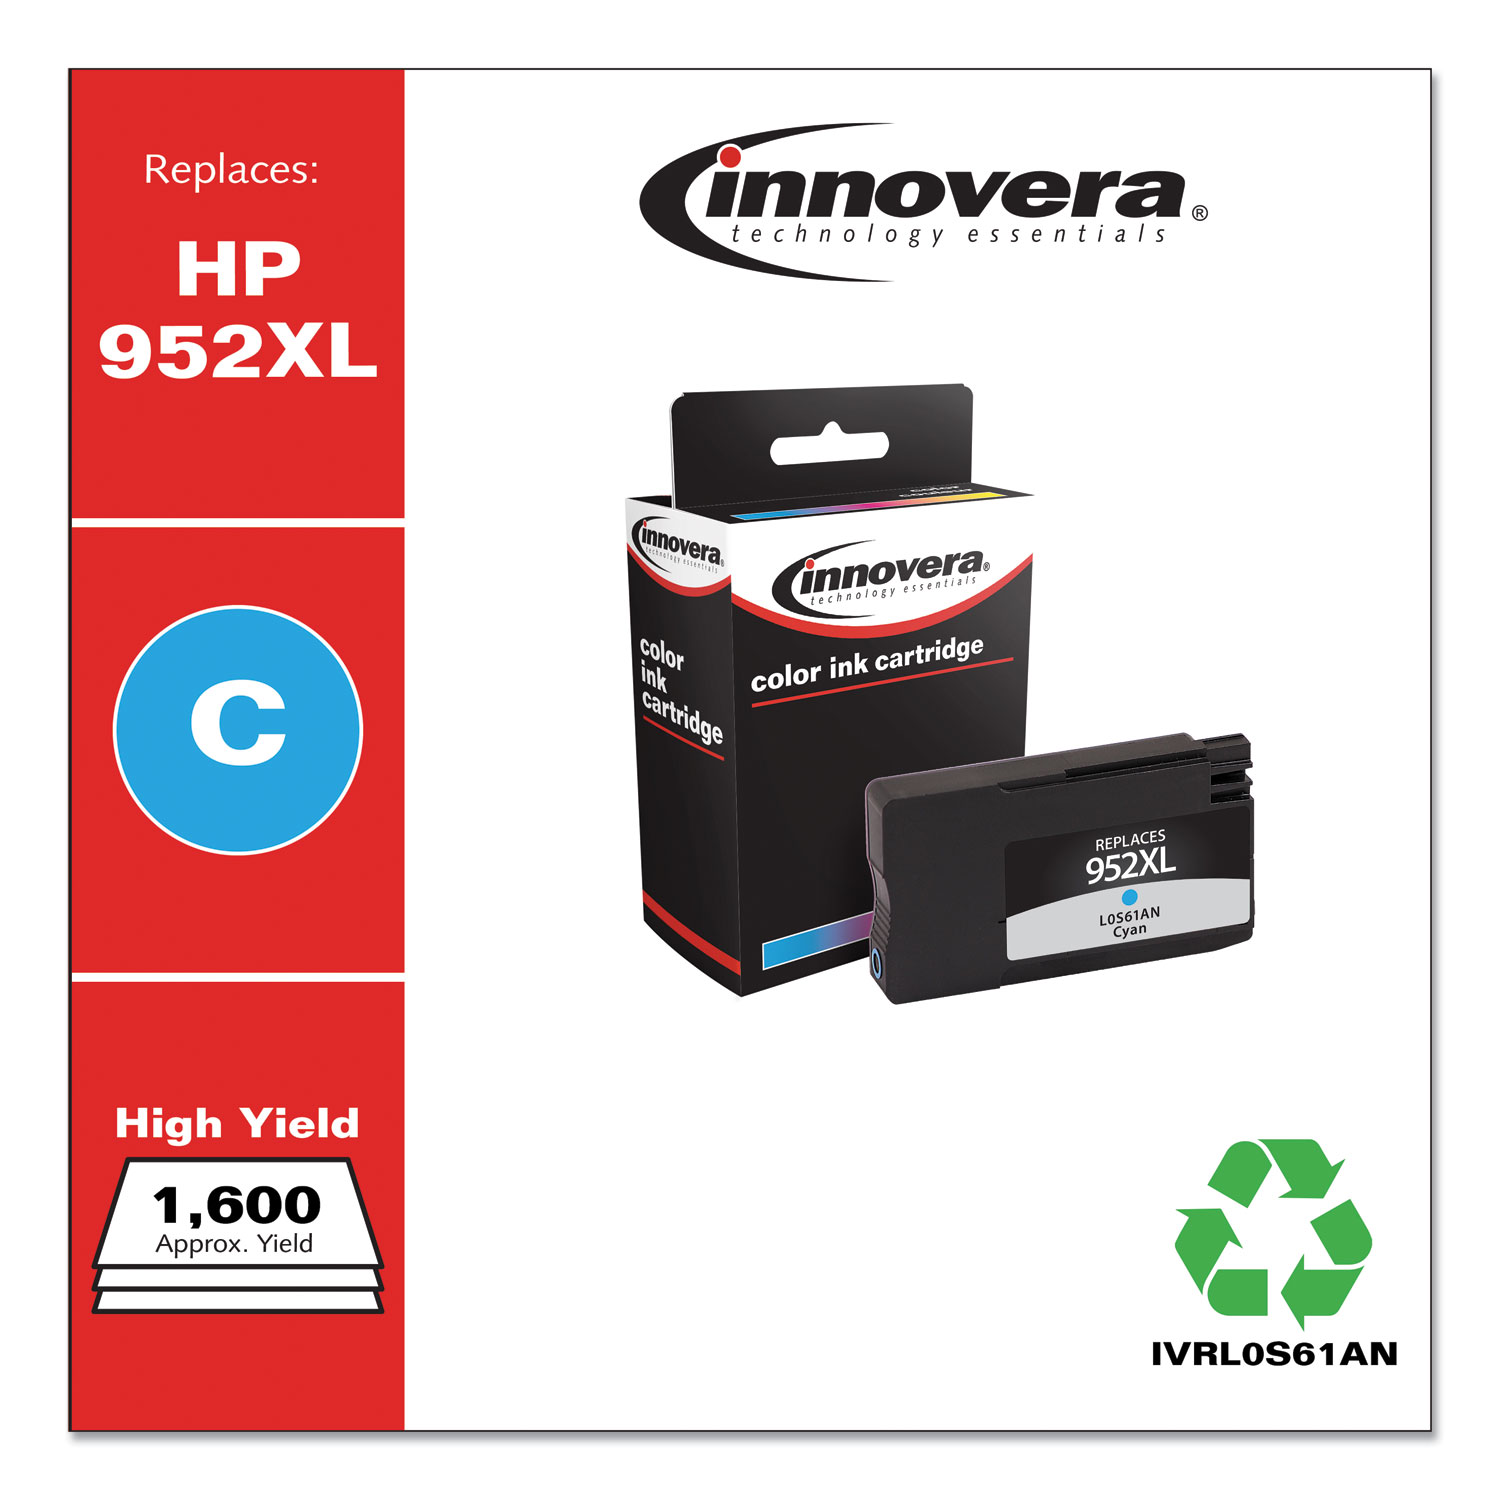  Innovera IVRL0S61AN Remanufactured Cyan High-Yield Ink, Replacement for HP 952XL (L0S61AN), 1,600 Page-Yield (IVRL0S61AN) 